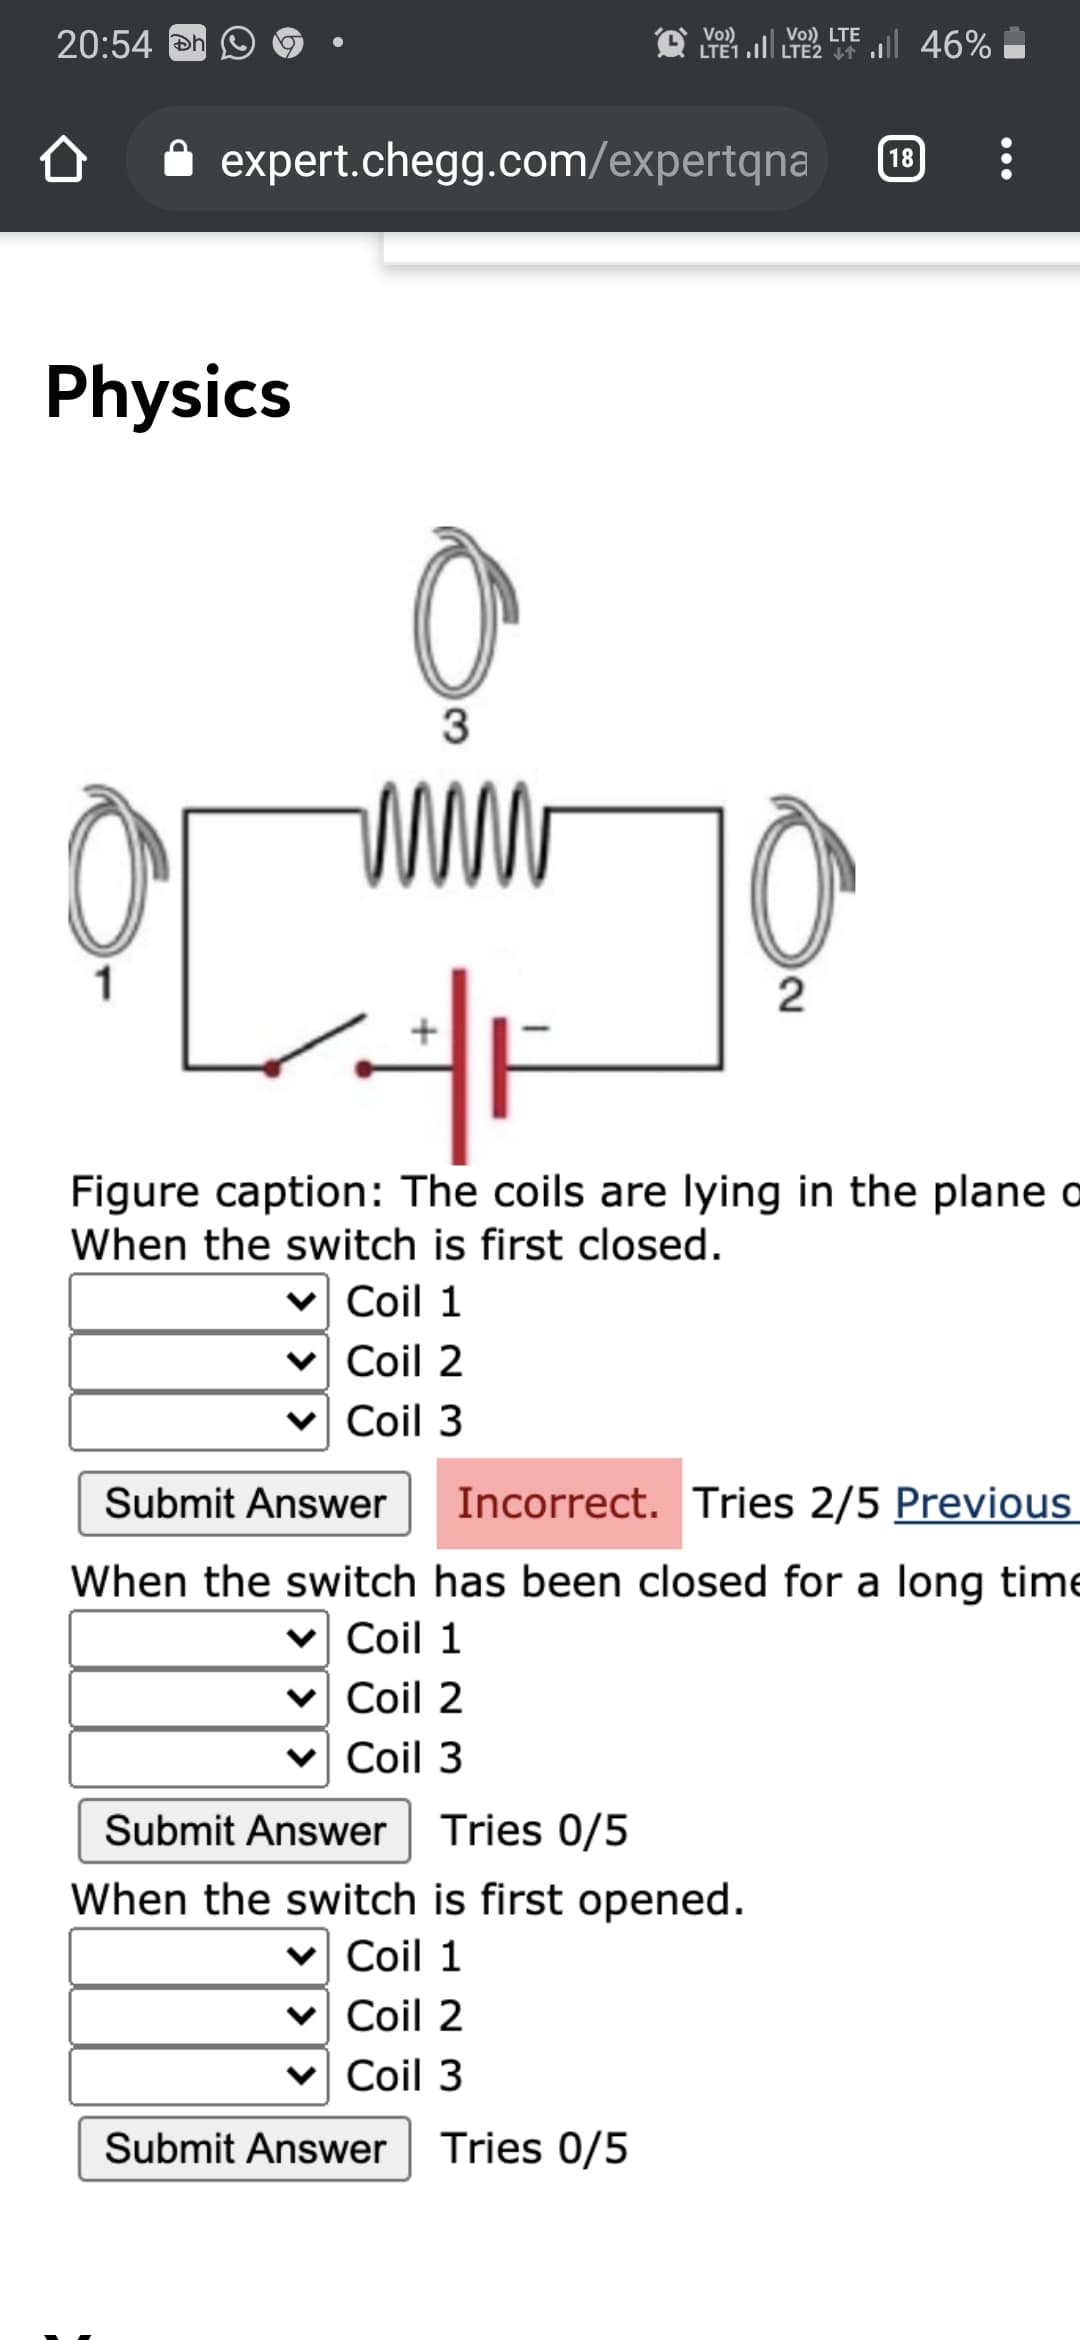 20:54 Đn
O Vo)
LTE1 .ll LTE2 I1
Vo) LTE 46%
expert.chegg.com/expertqna
18
Physics
3
www
1
Figure caption: The coils are lying in the plane o
When the switch is first closed.
v Coil 1
v Coil 2
Coil 3
Submit Answer
Incorrect. Tries 2/5 Previous
When the switch has been closed for a long time
v Coil 1
v Coil 2
Coil 3
Submit Answer
Tries 0/5
When the switch is first opened.
Coil 1
v Coil 2
Coil 3
Submit Answer
Tries 0/5
